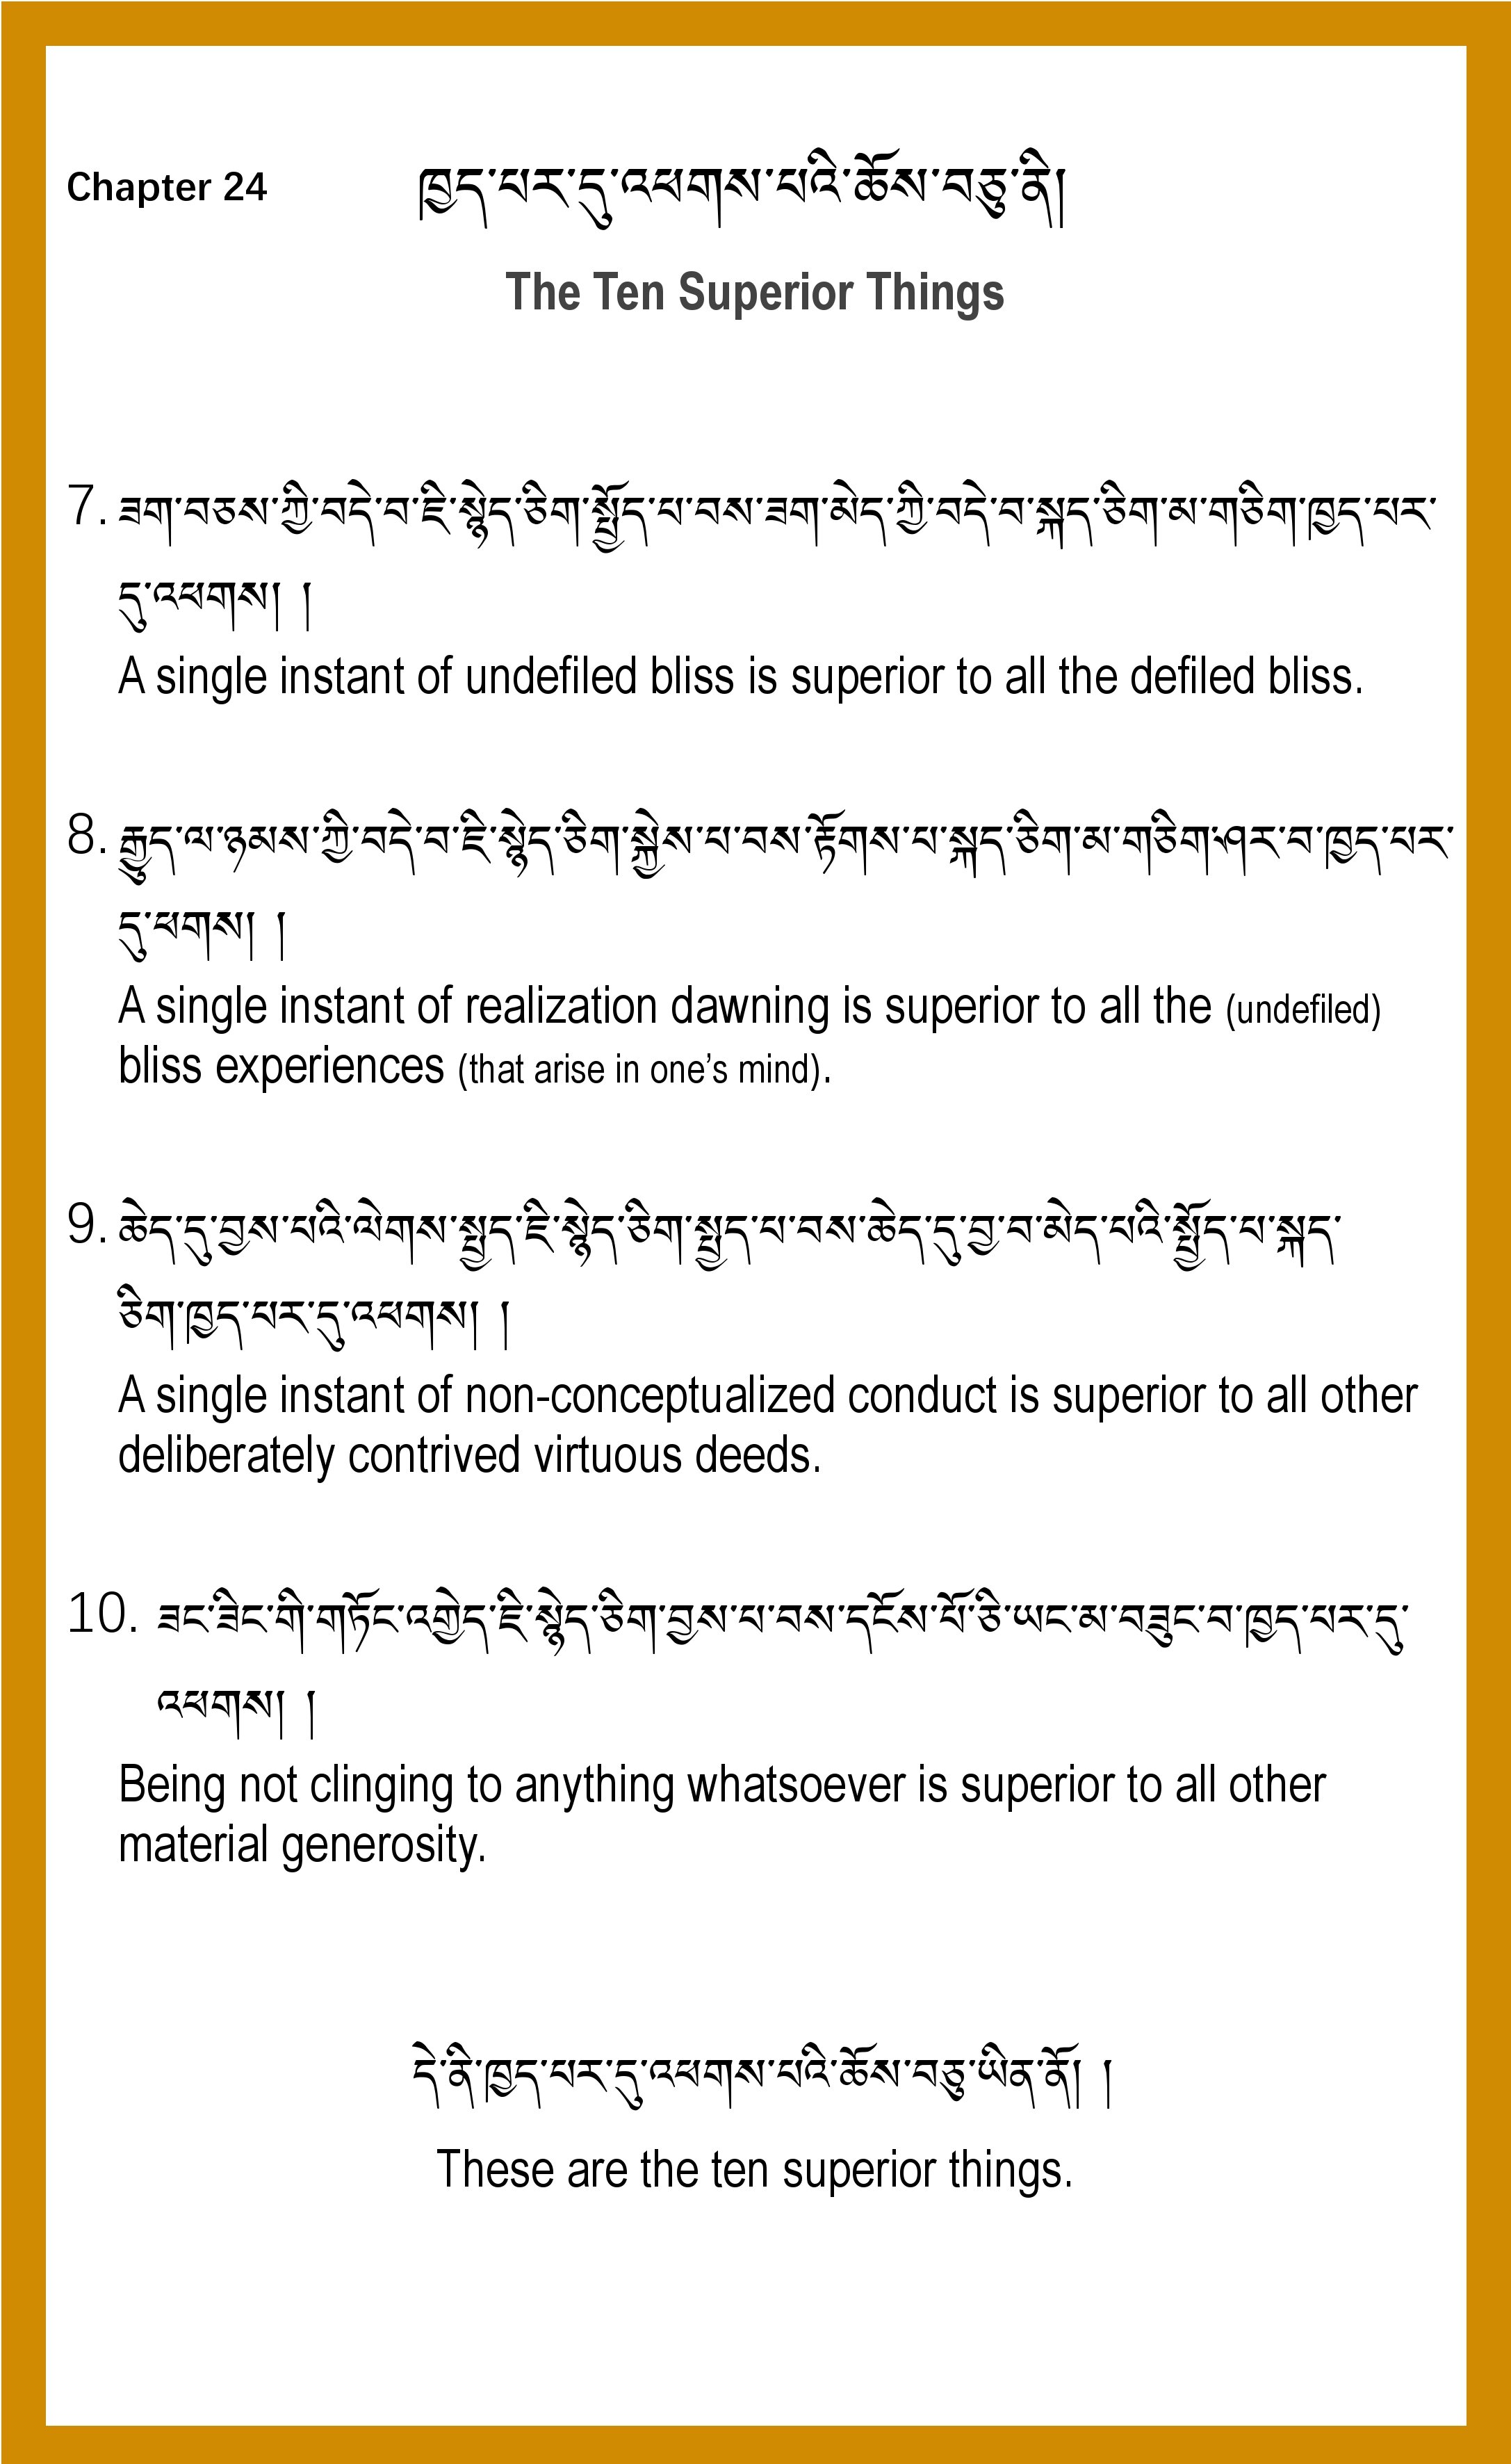 24-PGSP-The 10 Superior Things-CR Version0004.jpg